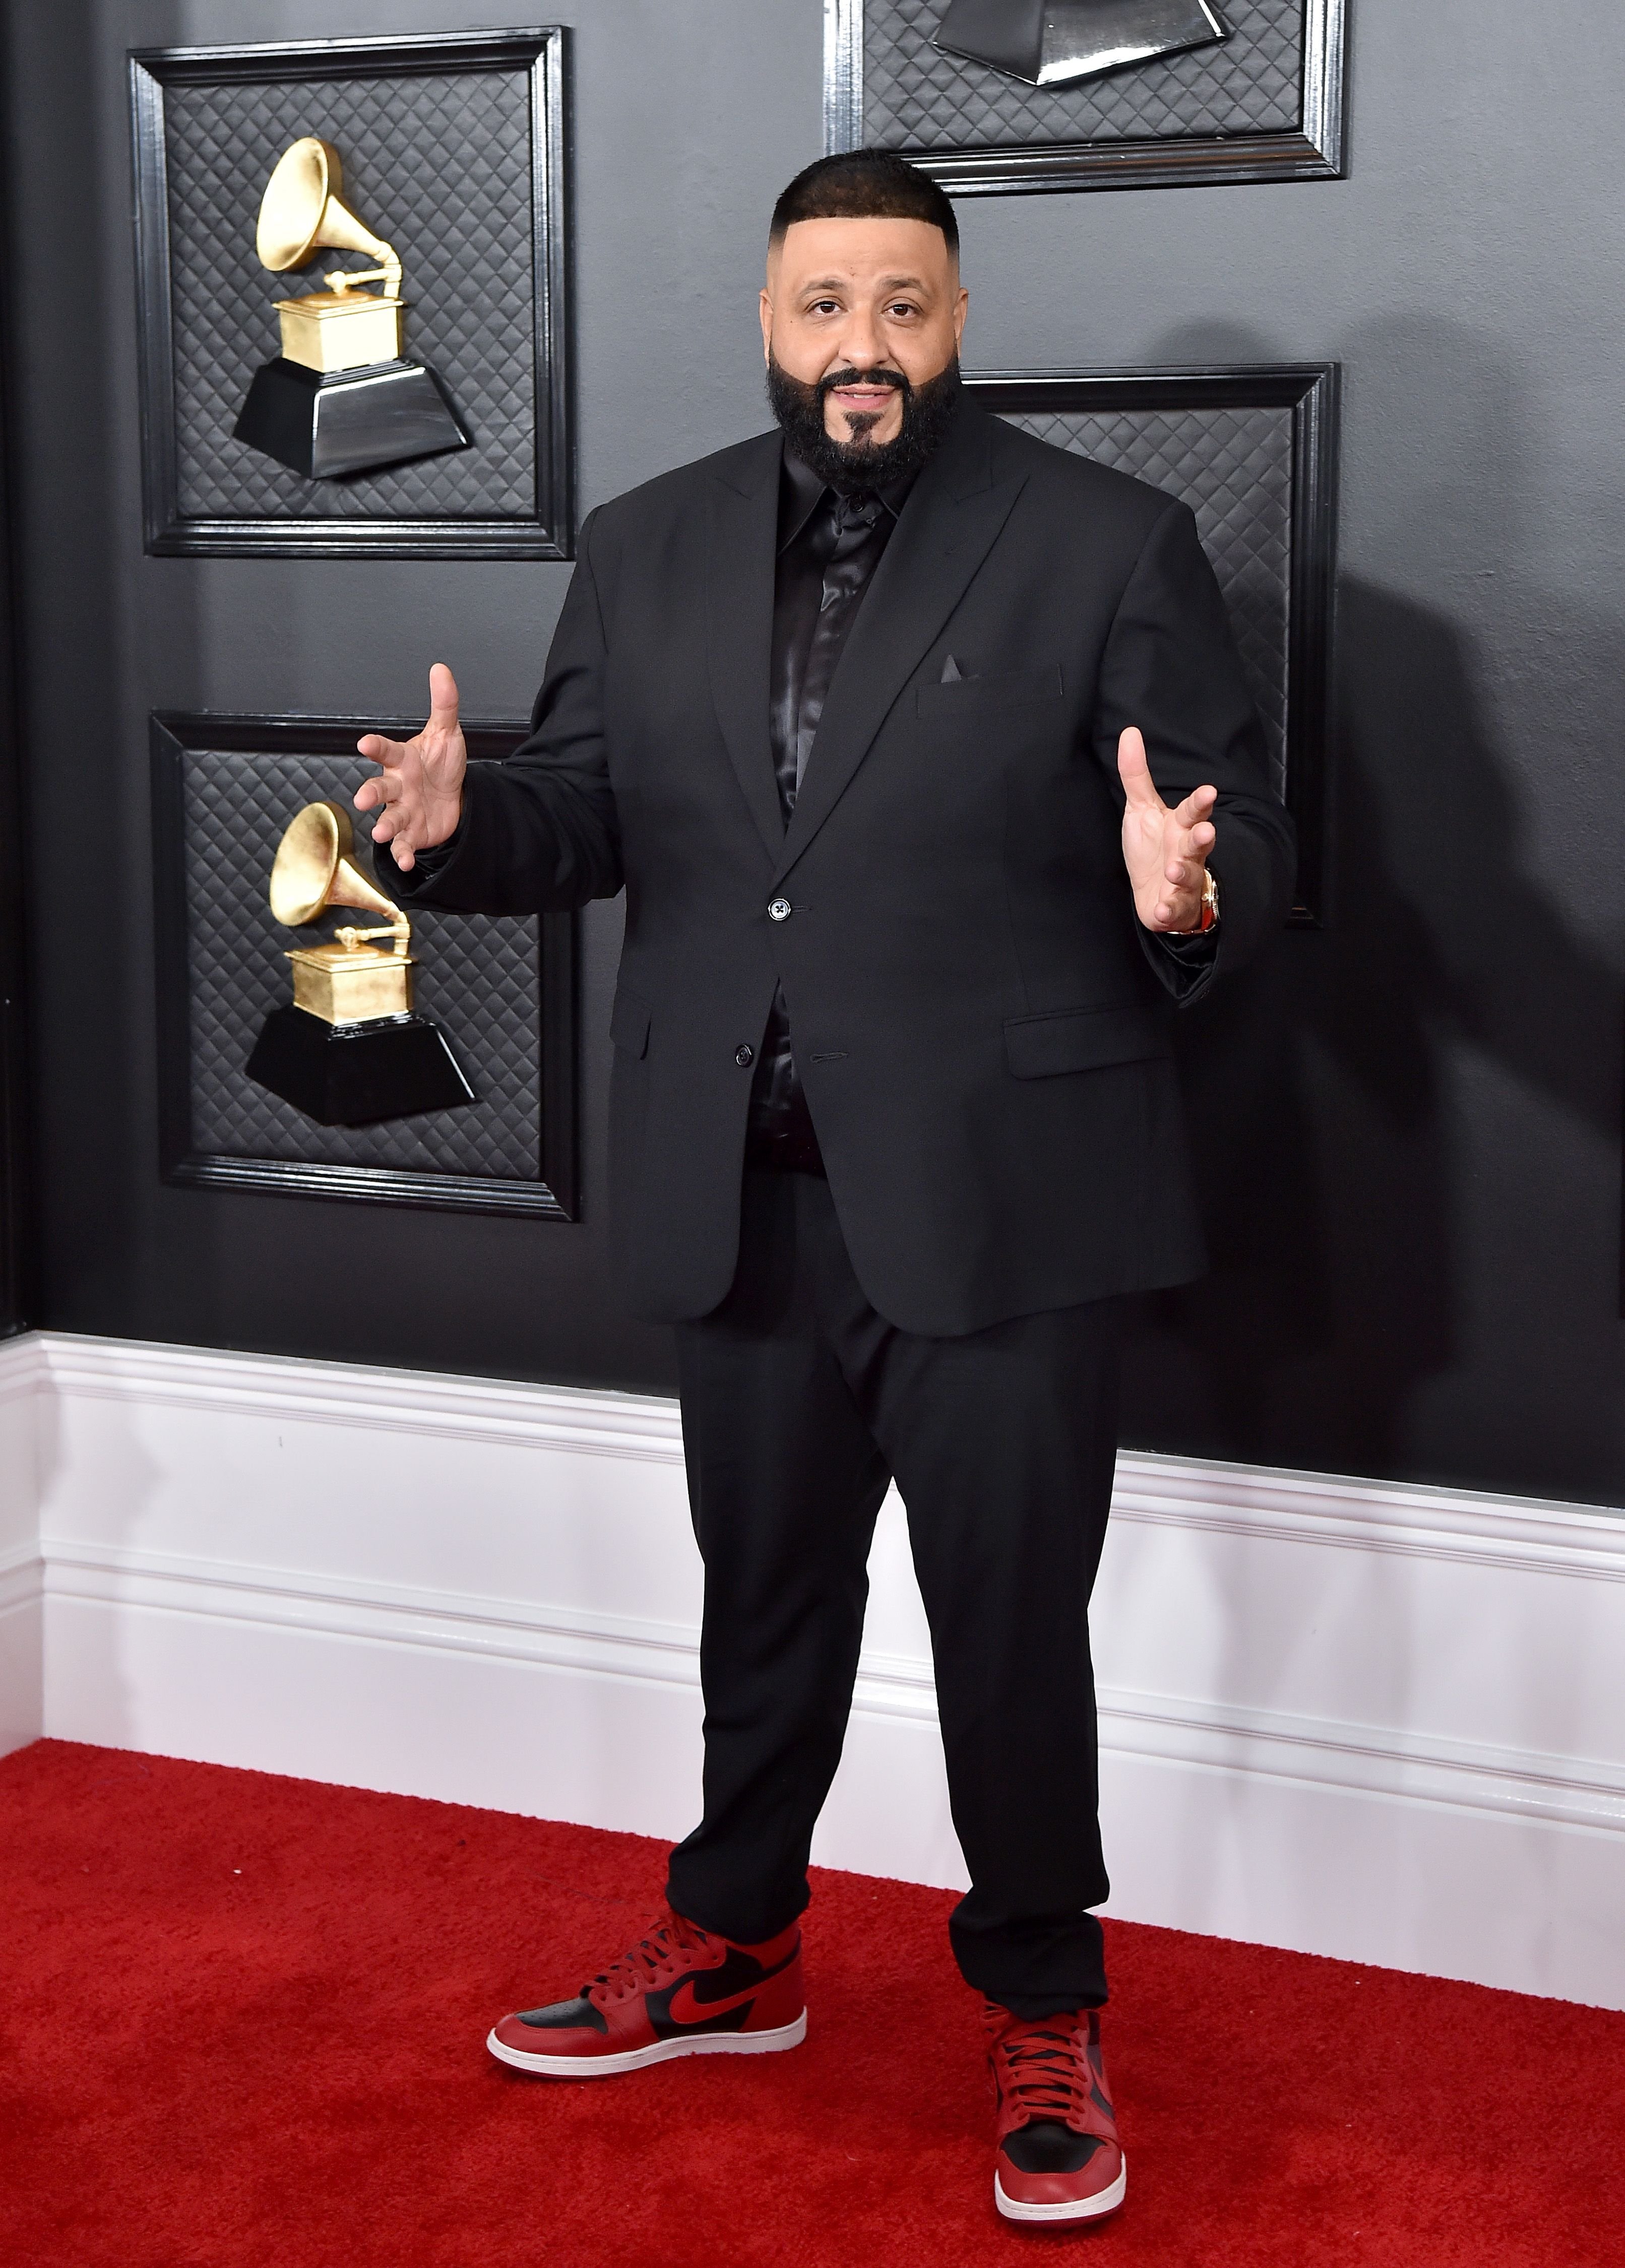  DJ Khaled attends the 62nd Annual GRAMMY Awards at Staples Center on January 26, 2020 in Los Angeles, California. | Source: Getty Images